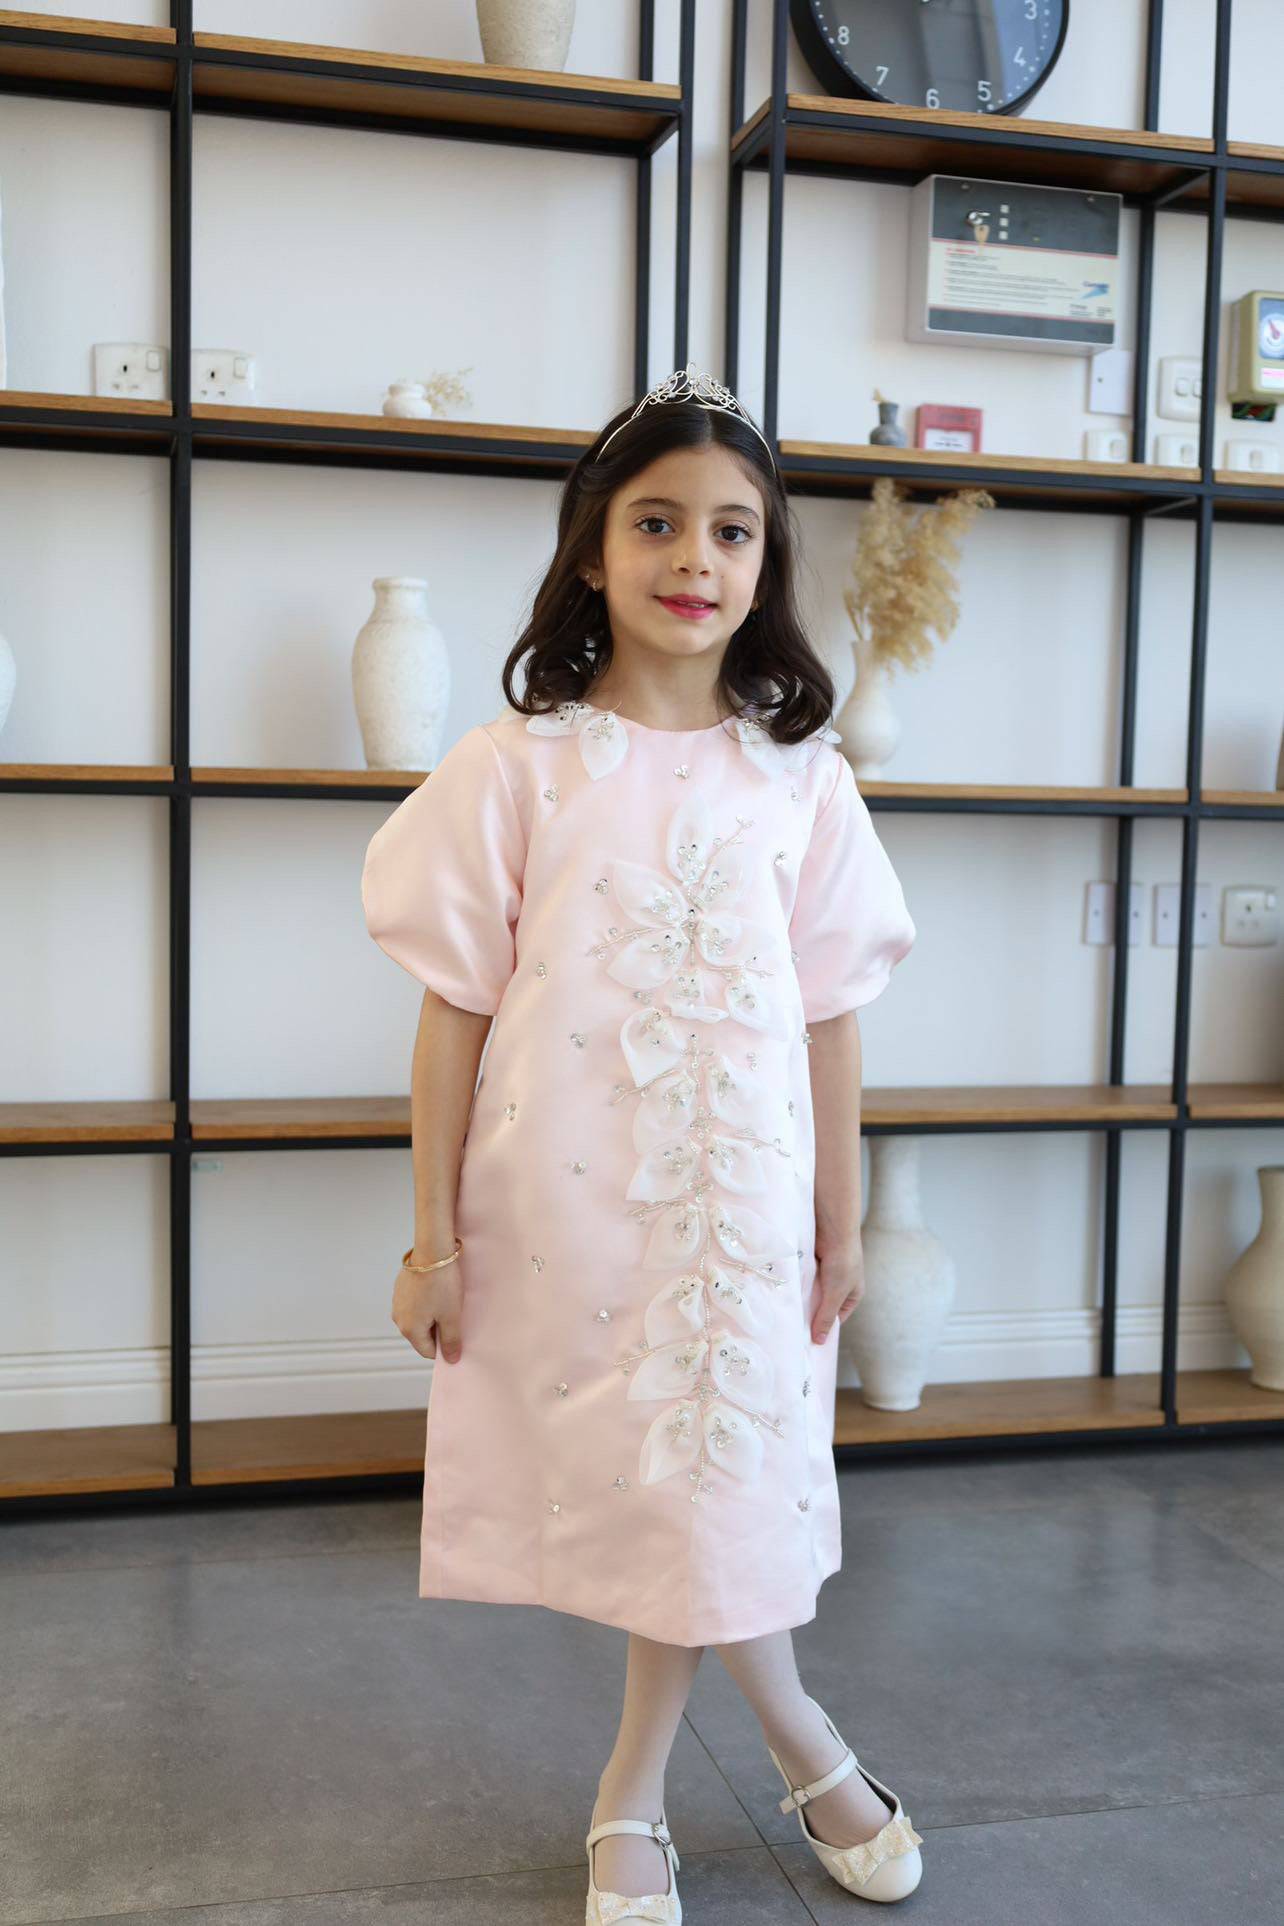  baby girl occasion dress for special short sleeve pink color with detail فستان بنات يومي راقي للحفلات و الاعياد